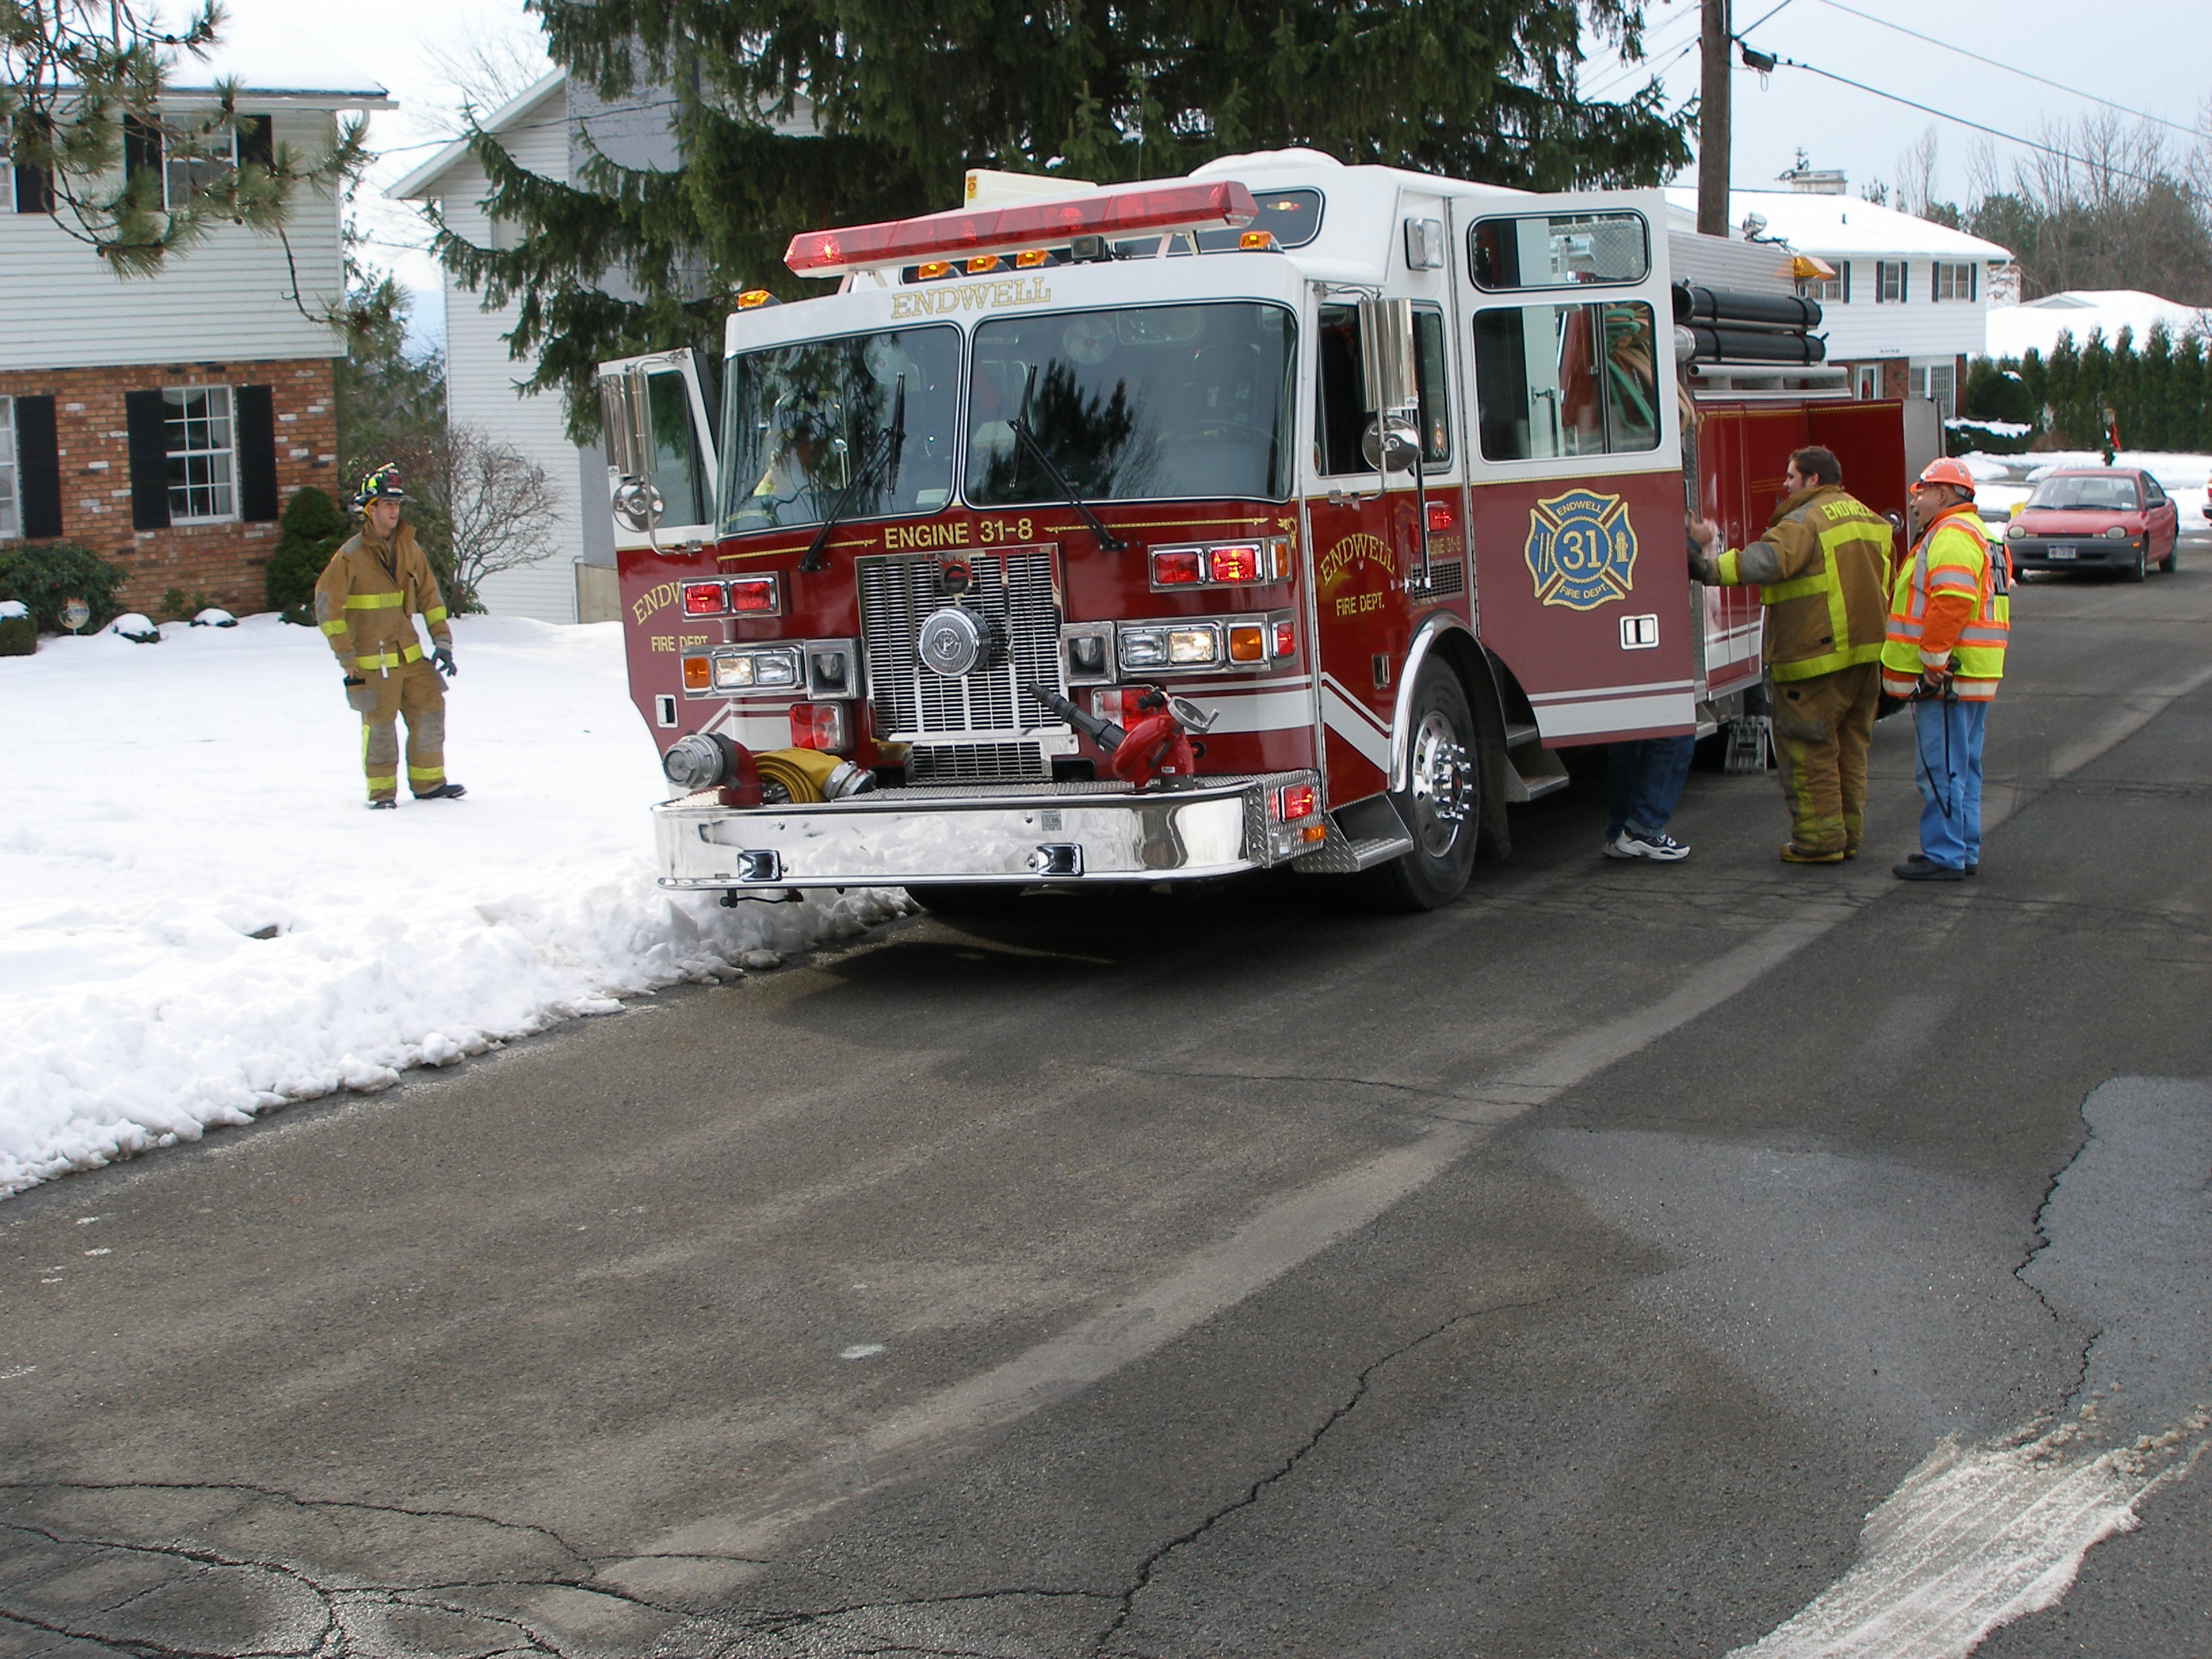 12-23-05  Response - Fire, Valleyview Stove Fire